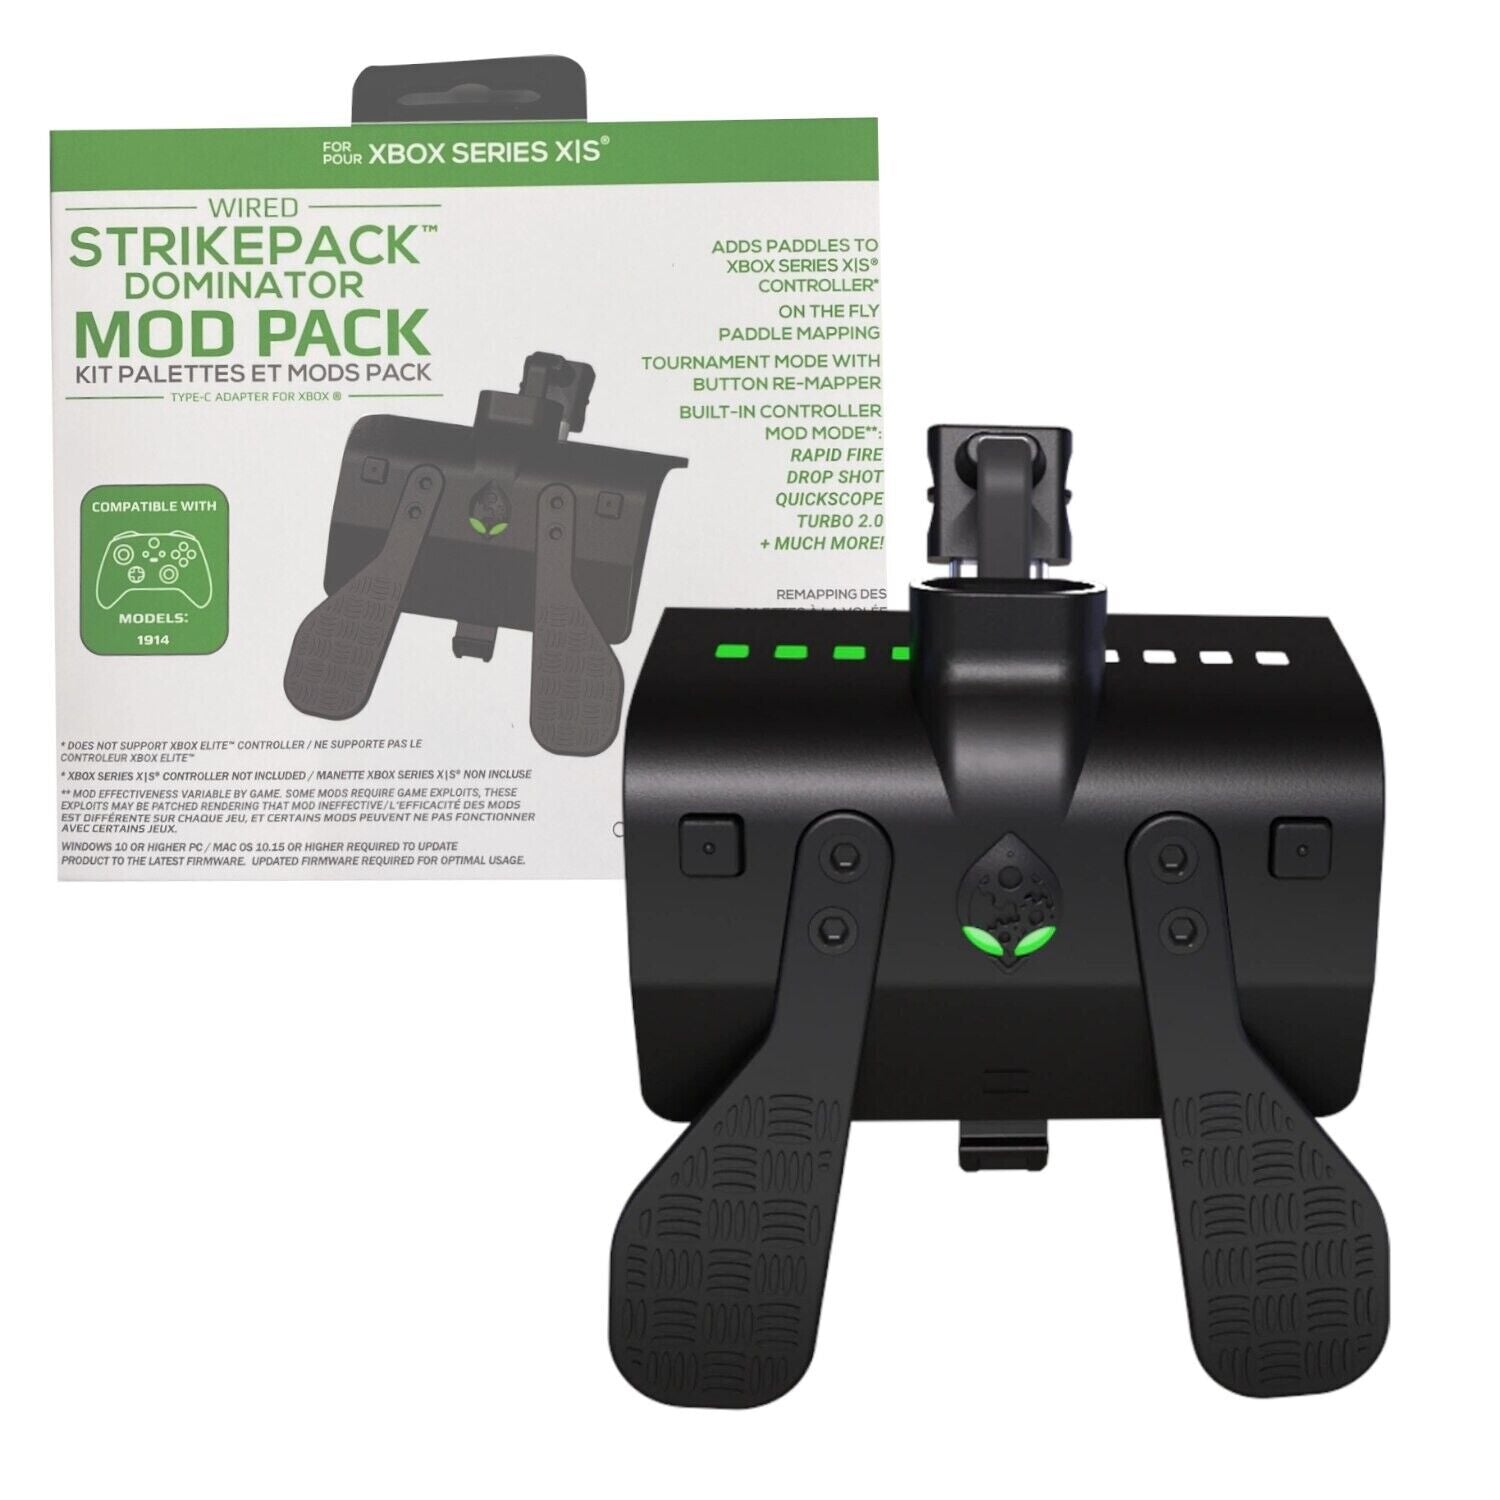 Collective Minds Strike Pack FPS Dominator Wired Next Gen MOD Pack for Xbox One